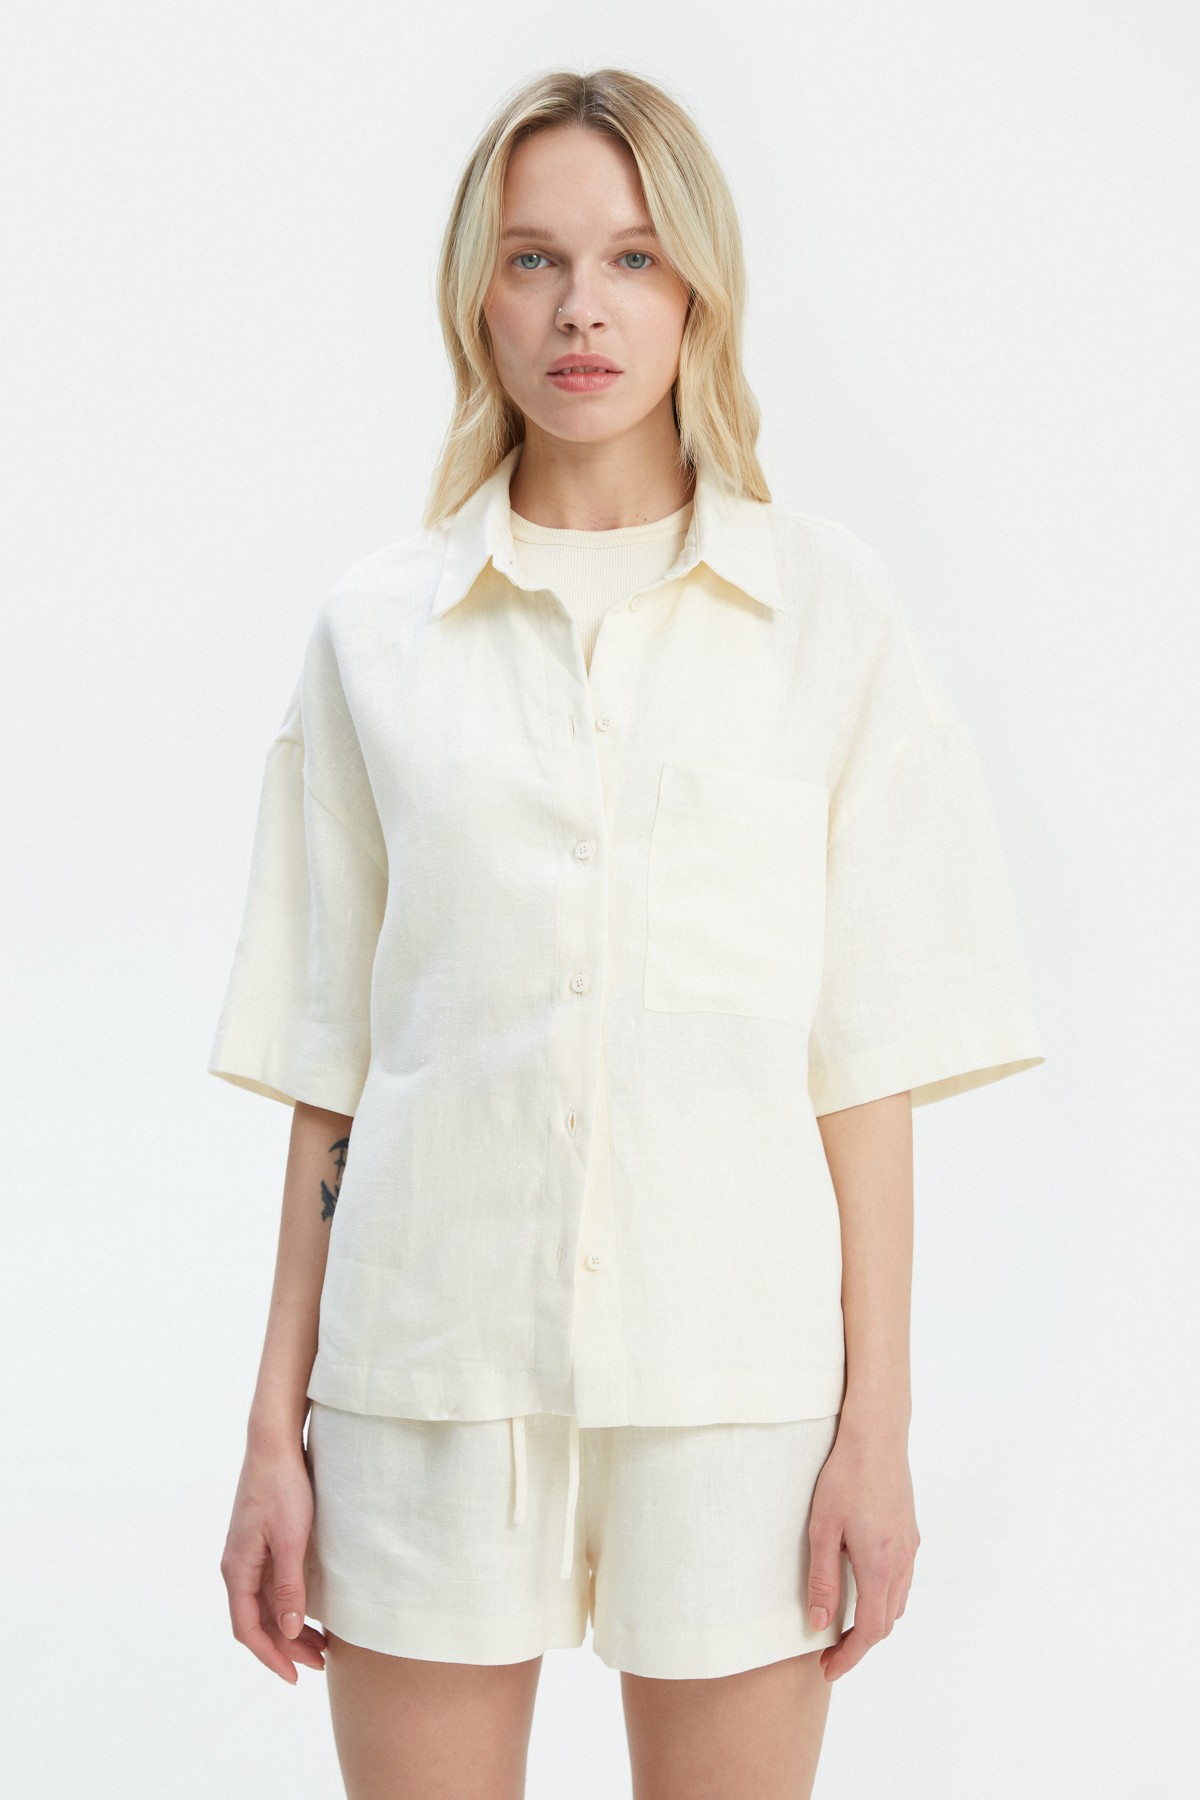 Milky linen shirt with elbow length sleeves